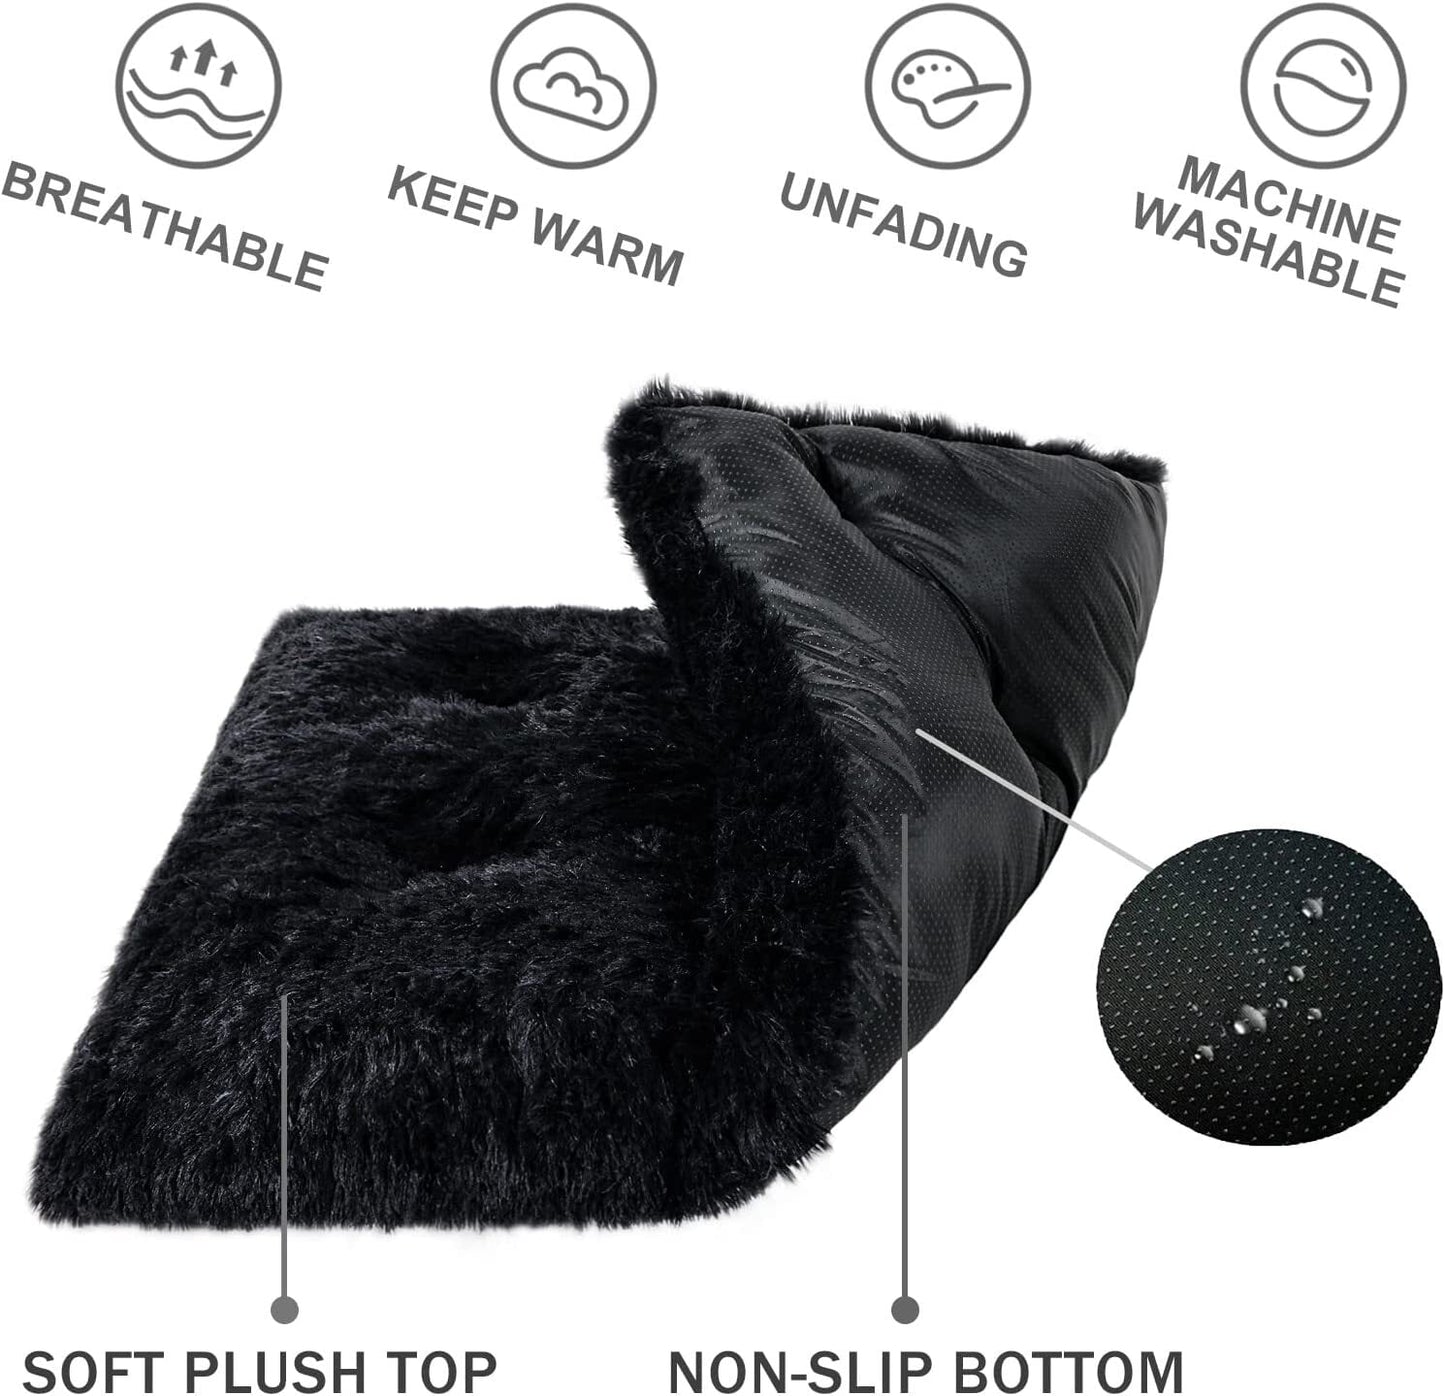 Exclusivo Mecla Soft Plush Dog Bed Crate Mat for Small Dogs (32*22*4 in), Faux Fur Fluffy Dog Pet Cat Kennel Pad with Anti-Slip Bottom, Machine Washable Black